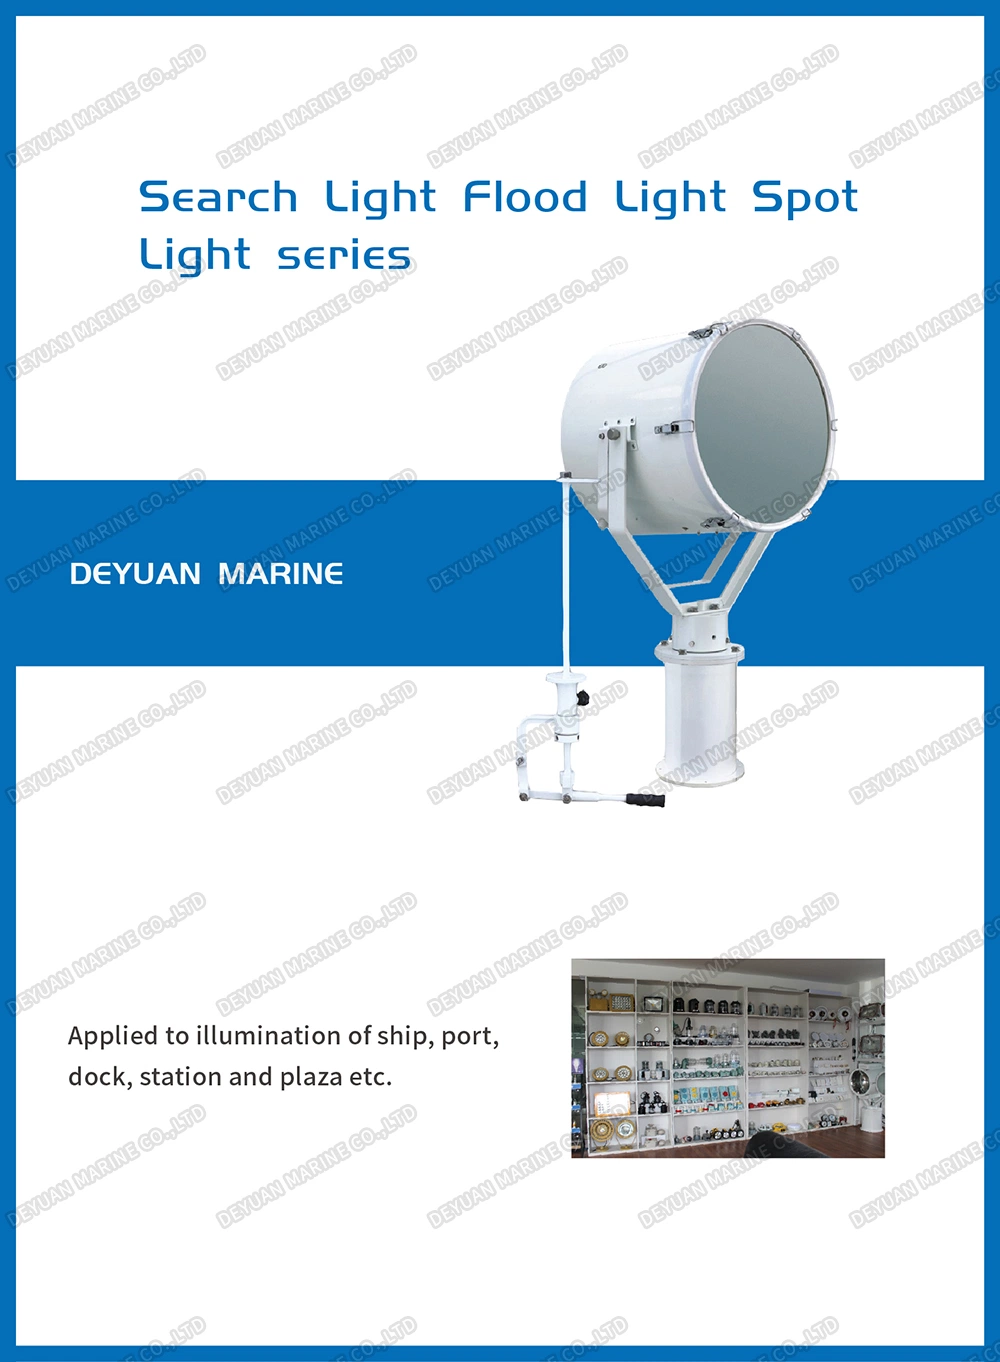 Tz3 Marine Stainless Steel Manual Control Searchlight